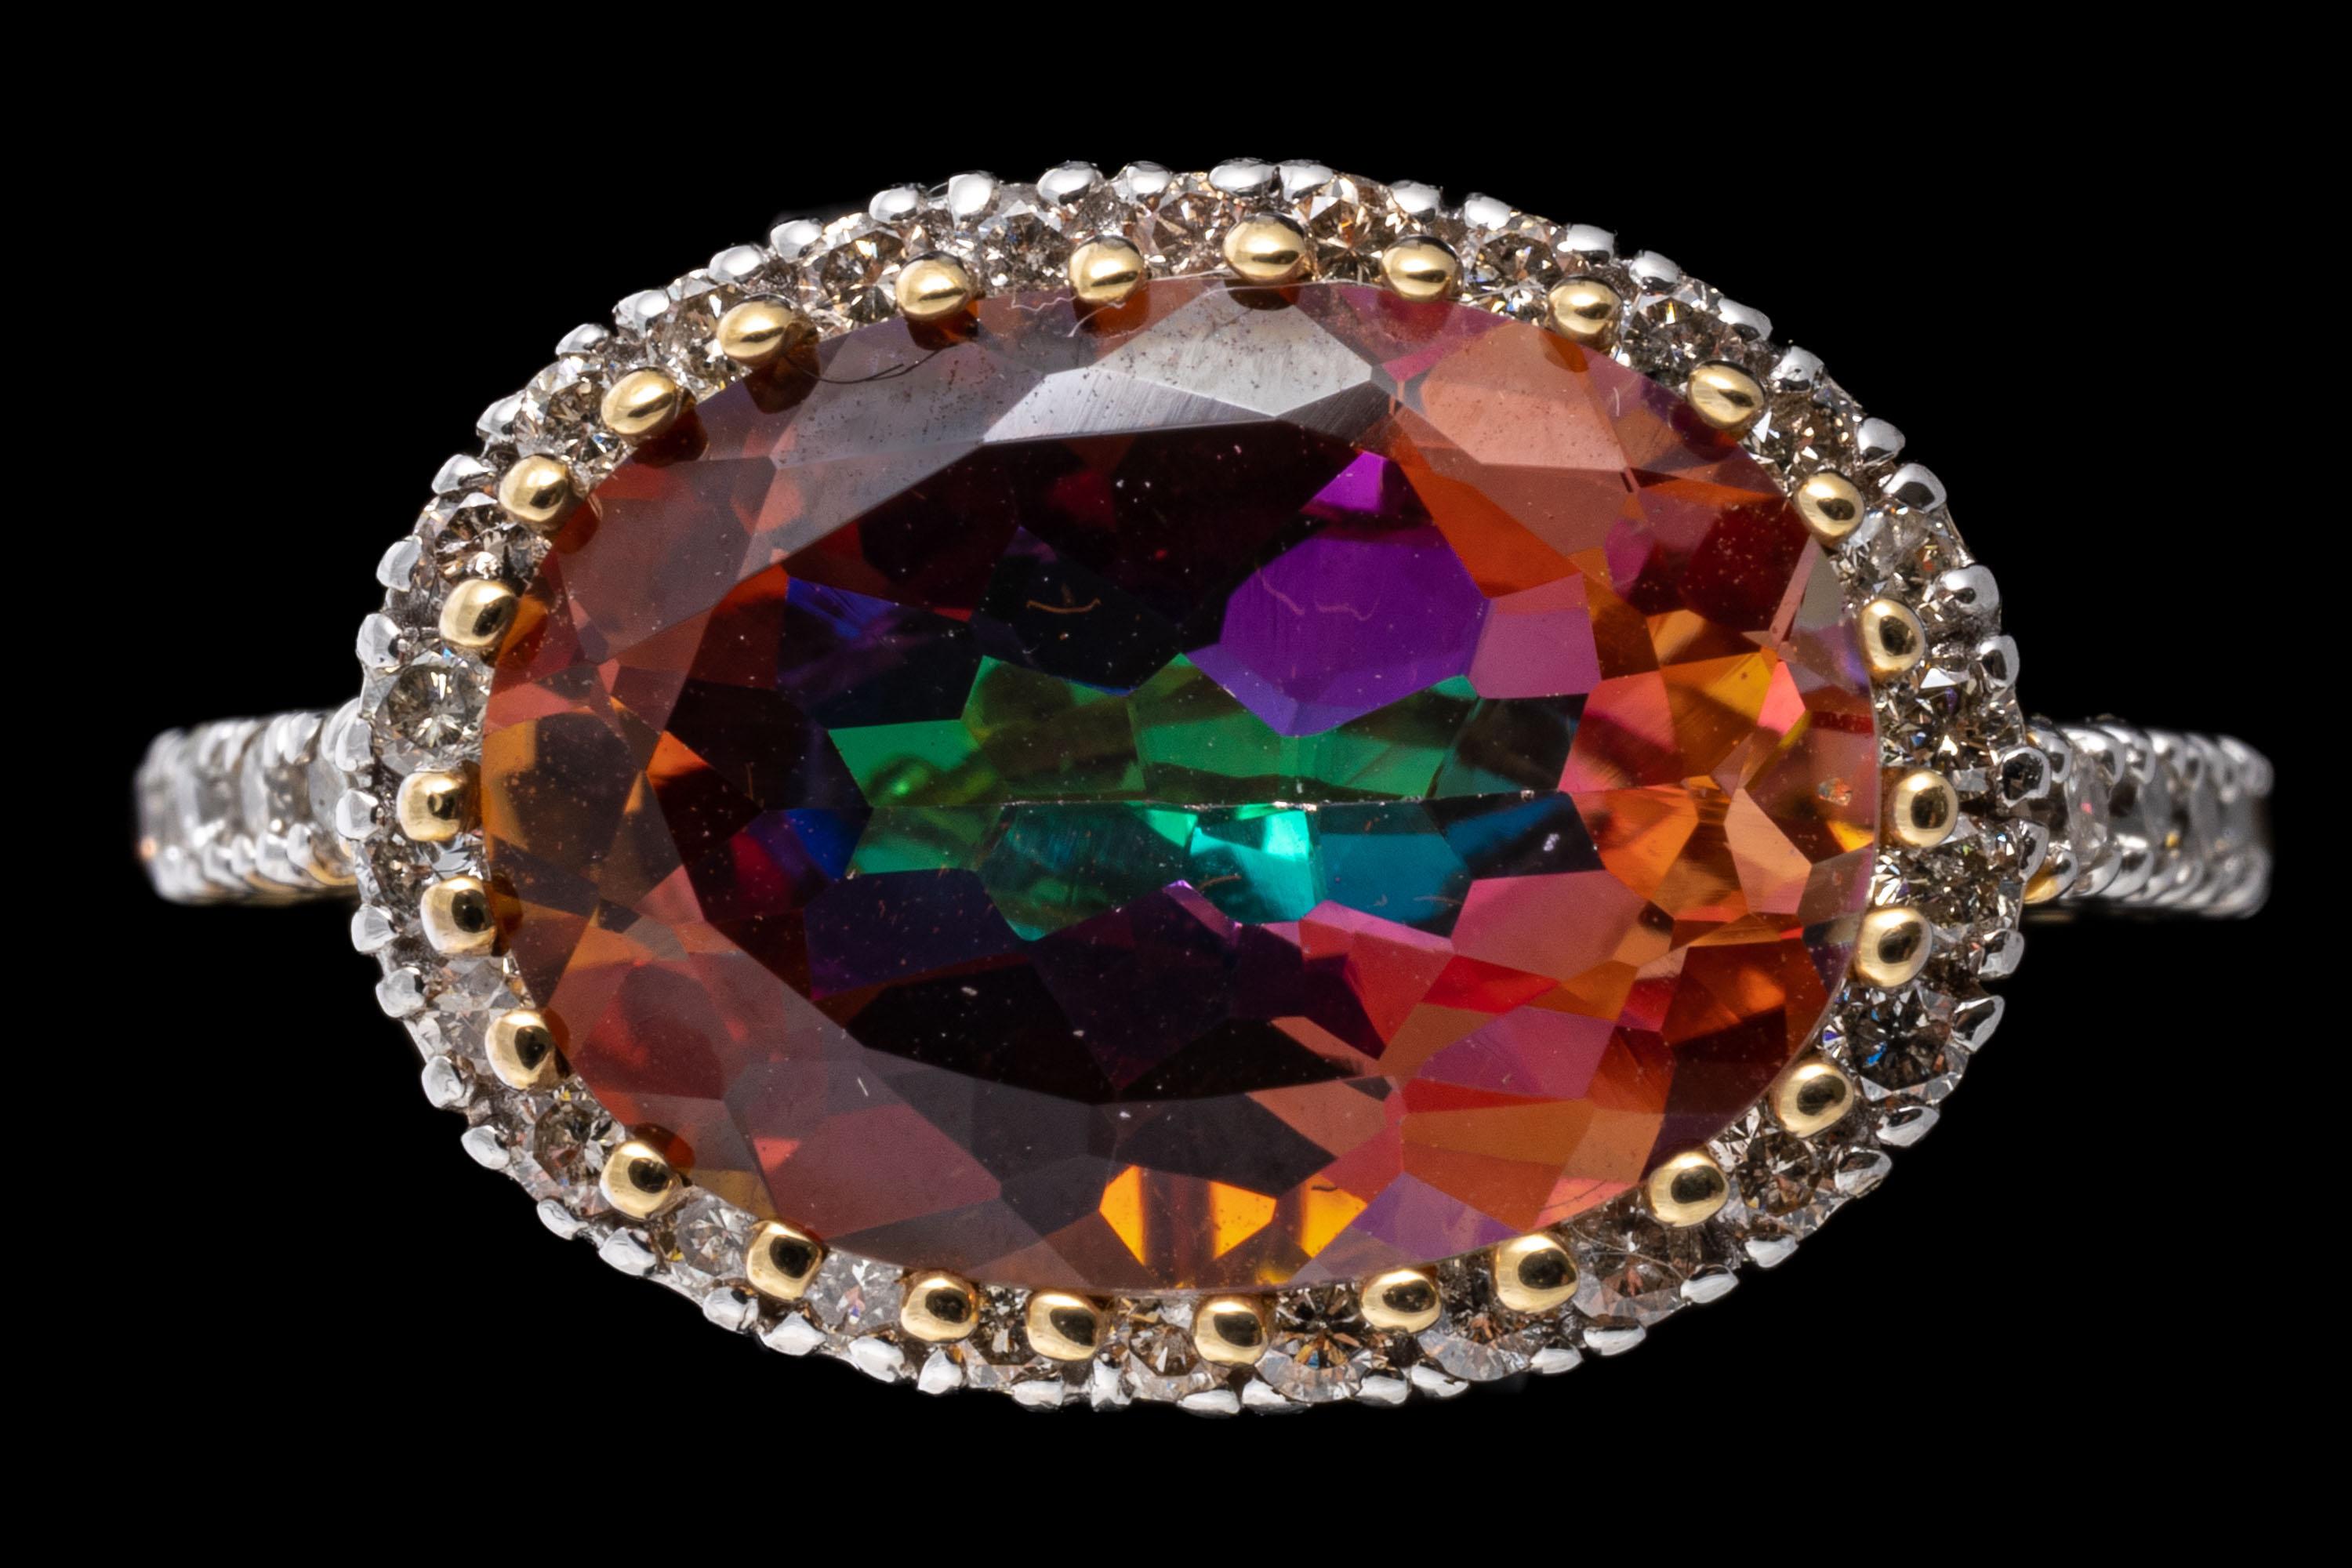 14k yellow gold ring. This striking ring has a horizontal oval faceted, pink mystic topaz center, set with an ornate prong decoration and framed with a halo of round faceted diamonds, that extend down the shoulders, 0.40 TCW.
Marks: 14k
Dimensions: